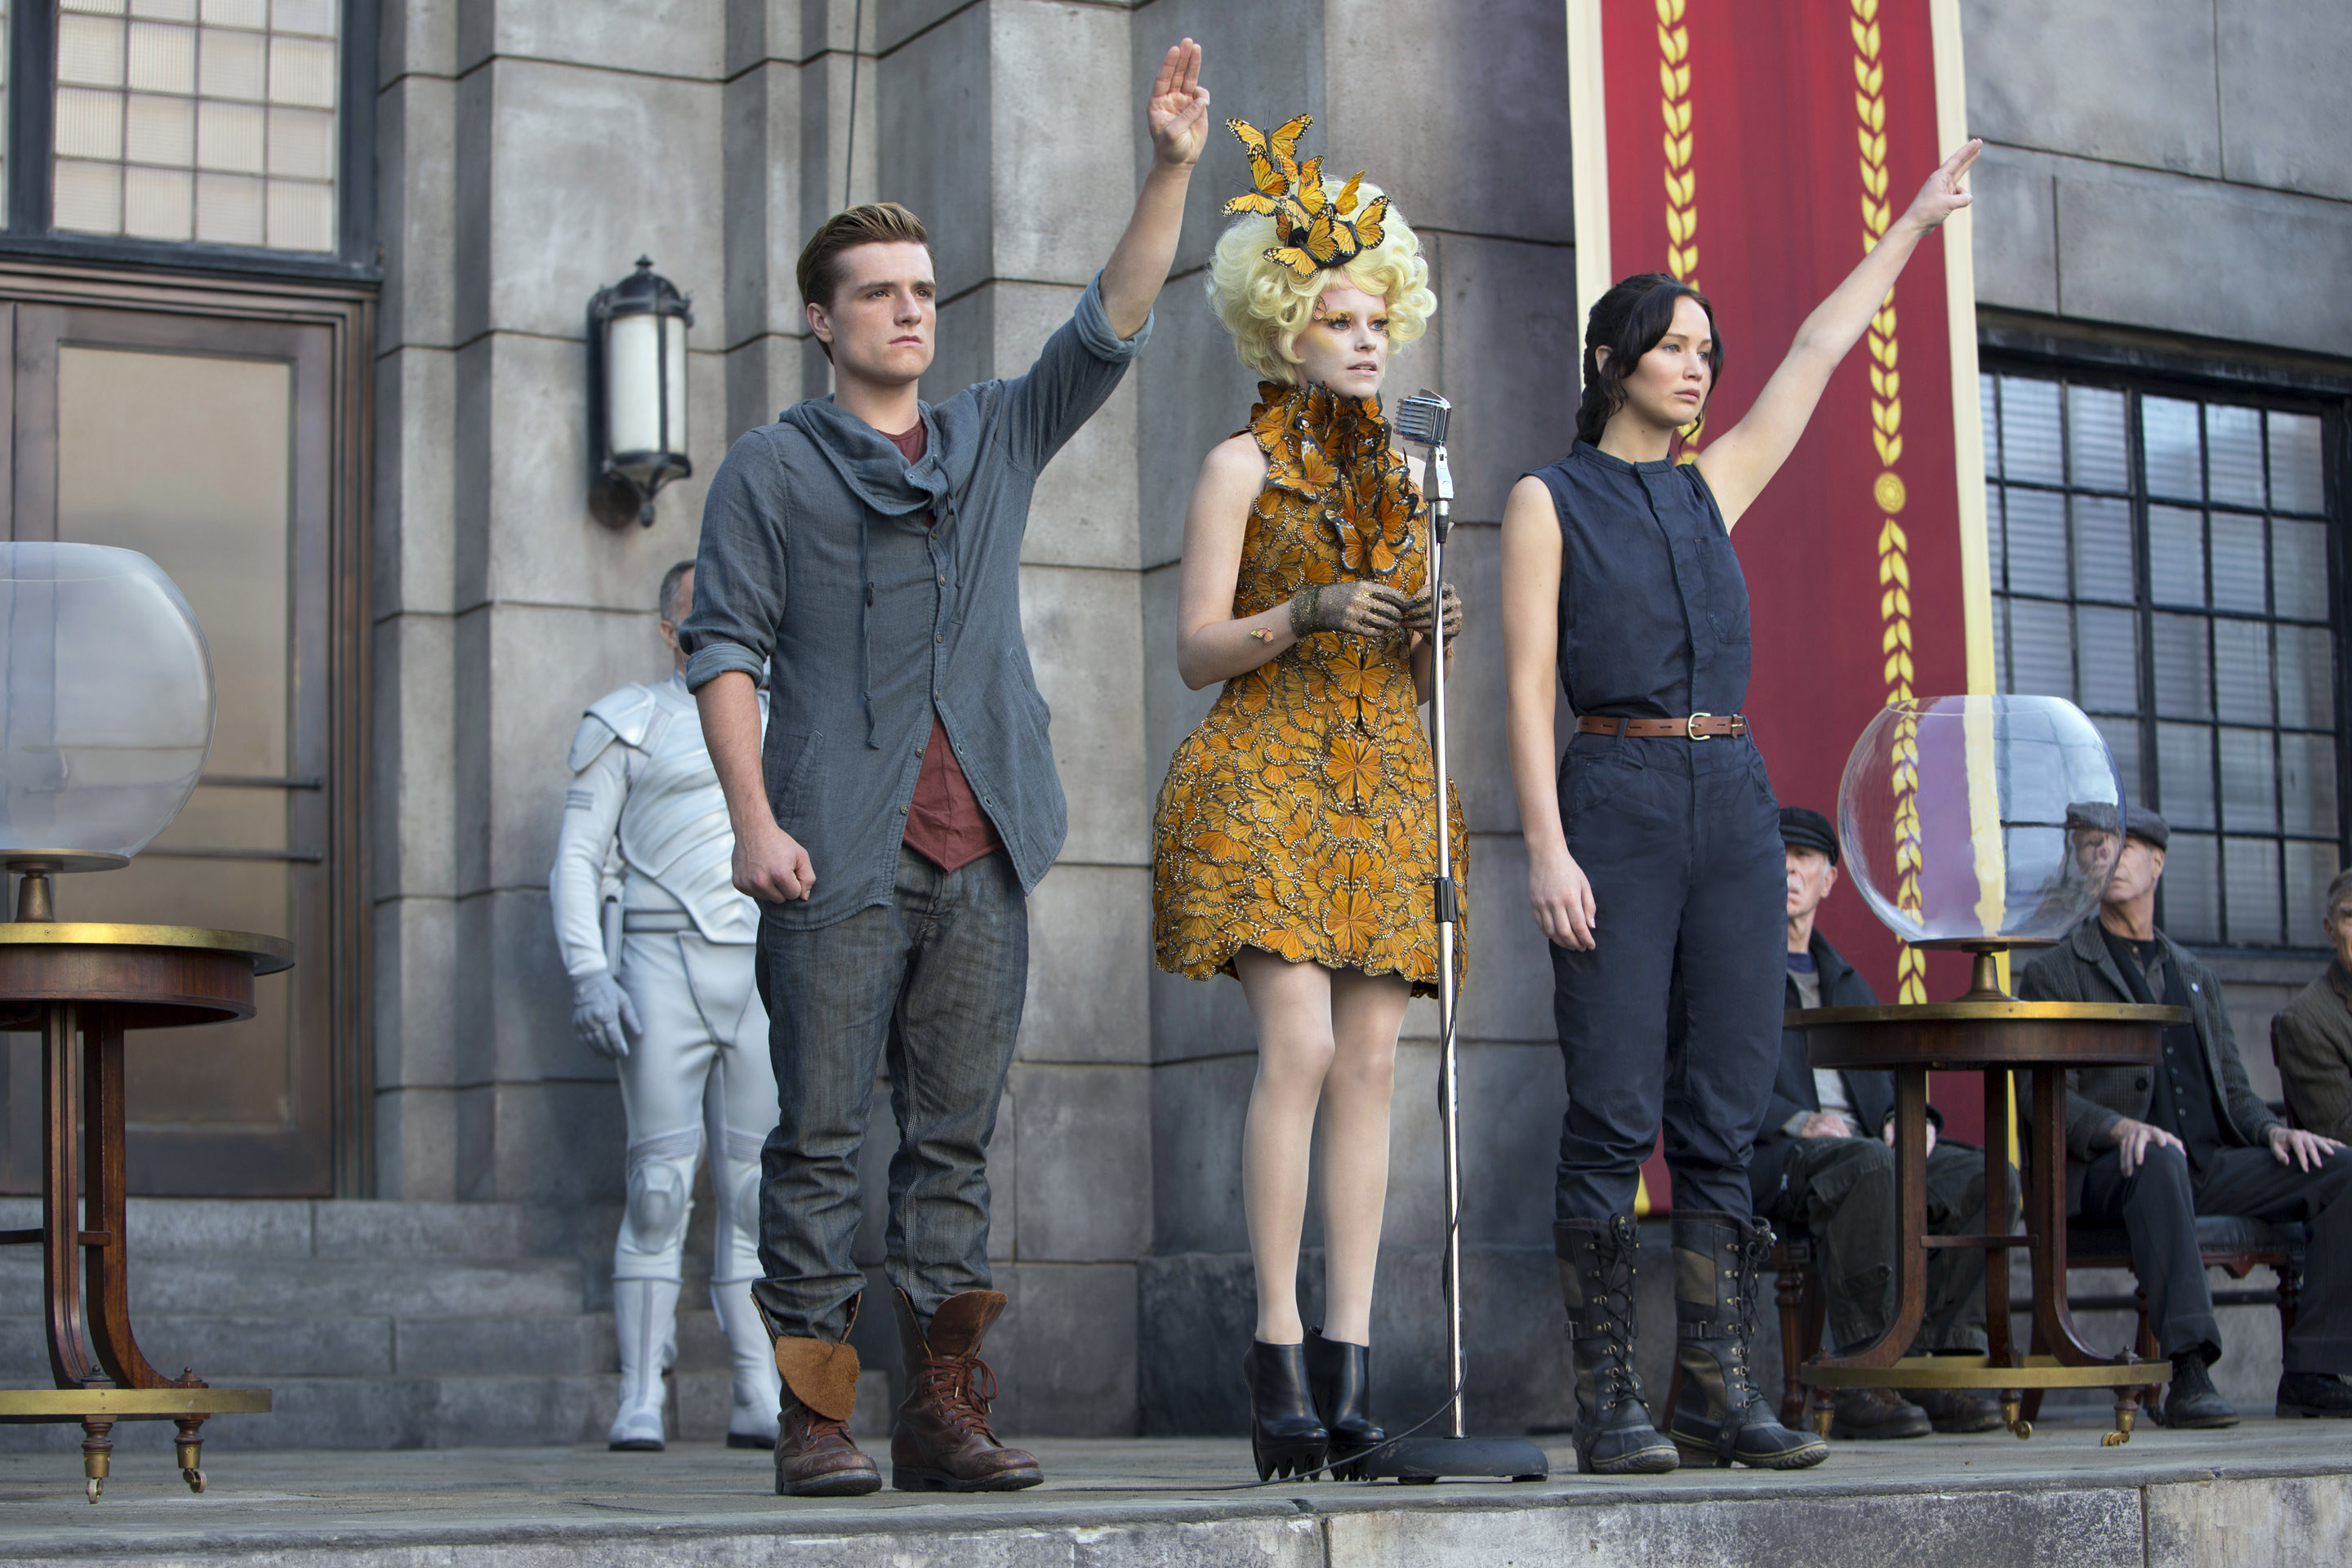 Effie stands in between Peeta and Katniss at the quarter quell reaping